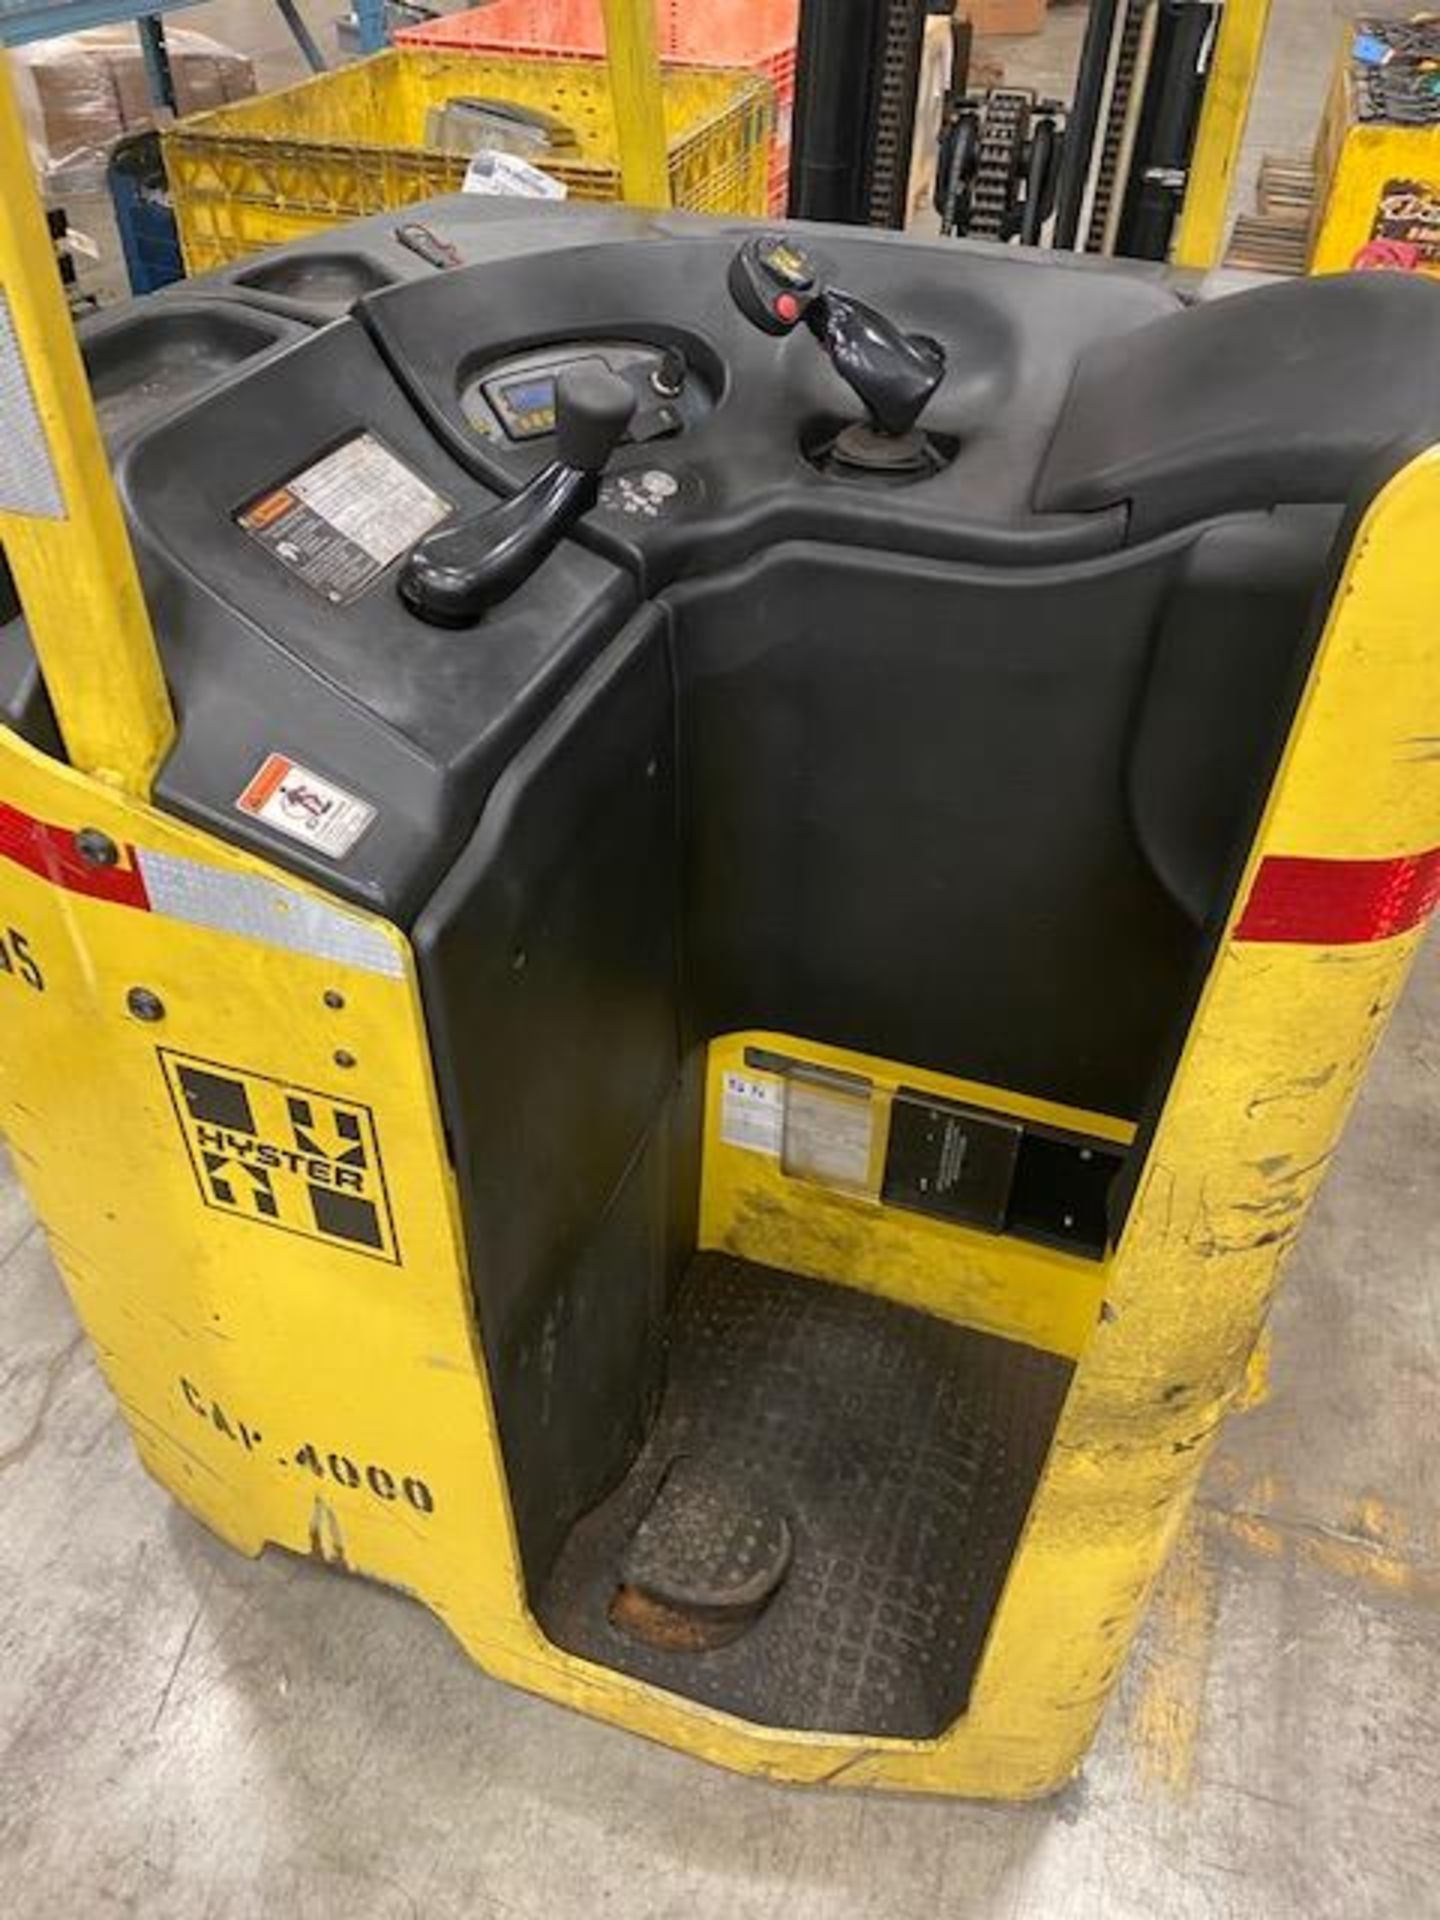 2014 Hyster 4,000 Lb Capacity Electric Forklift Model E40HSD2-21 - Image 7 of 9